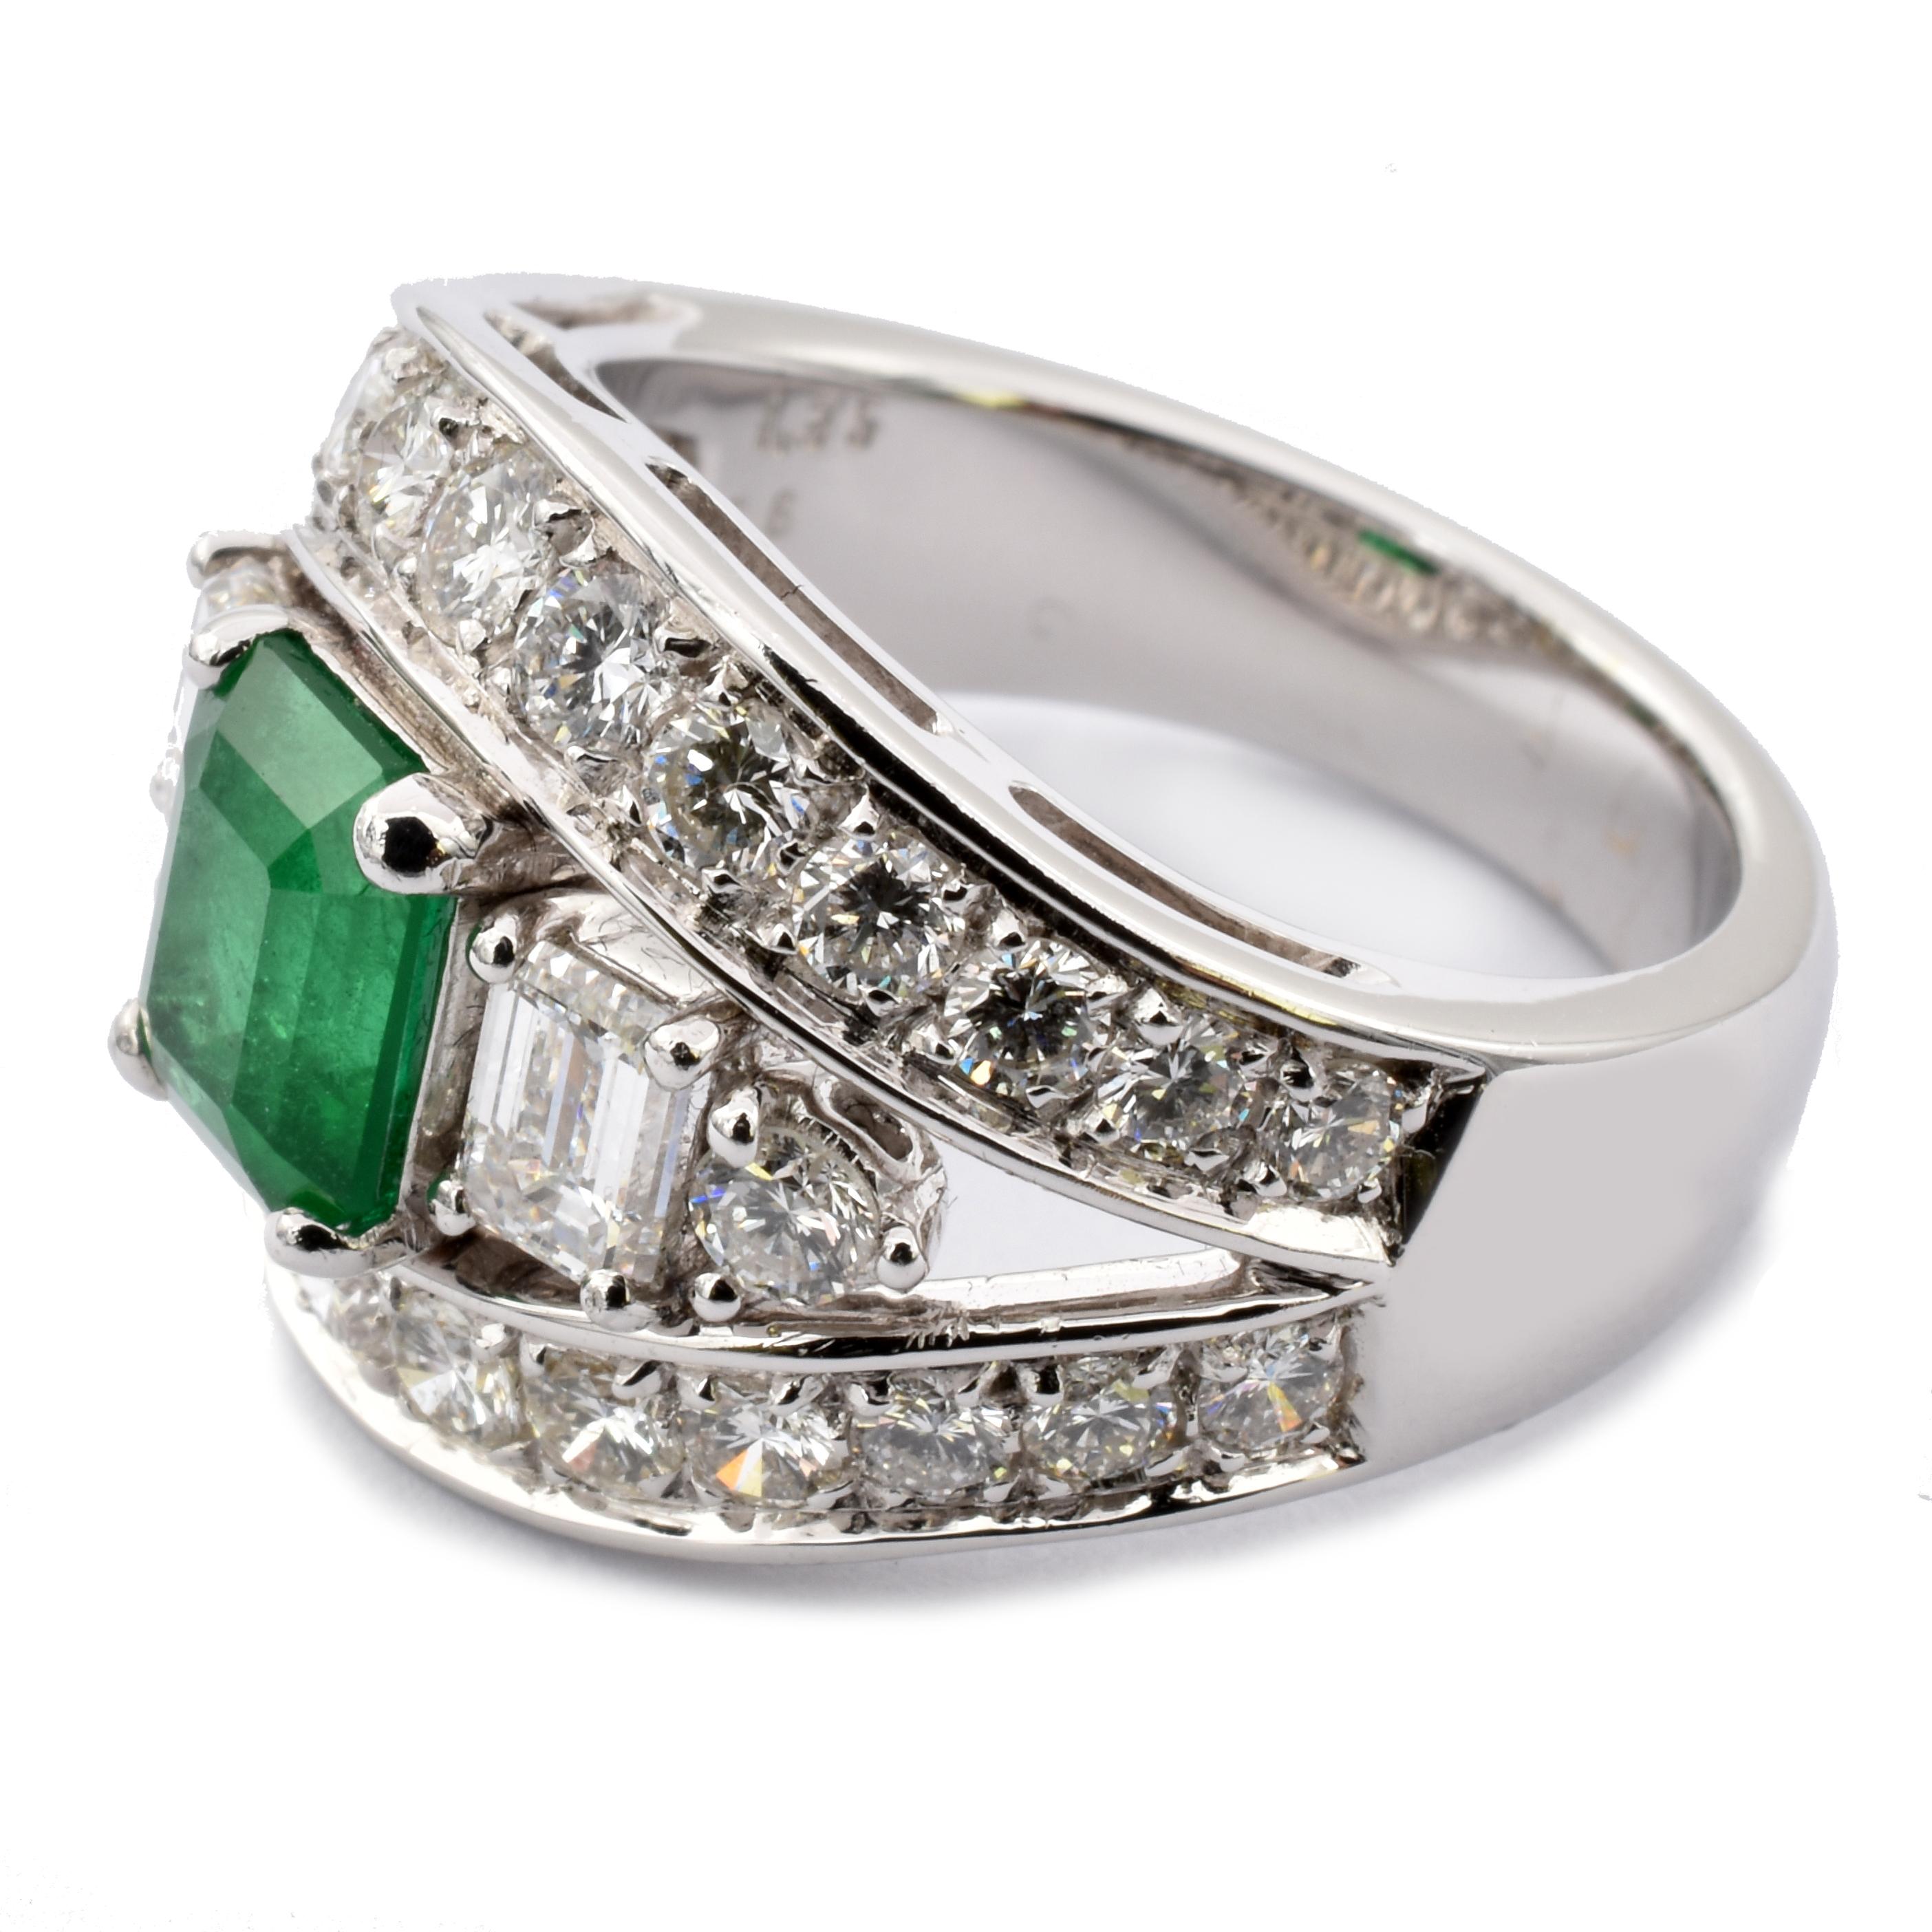 Gilberto Cassola 18Kt White Gold Ring with an Octagonal Cut Intense Green Natural Brazilian Emerald. 
This Ring has two Emerald Cut and two Round Diamonds on each side of the Emerald surrounded by Round Diamonds.
Intense Green Brazilian Emerald ct